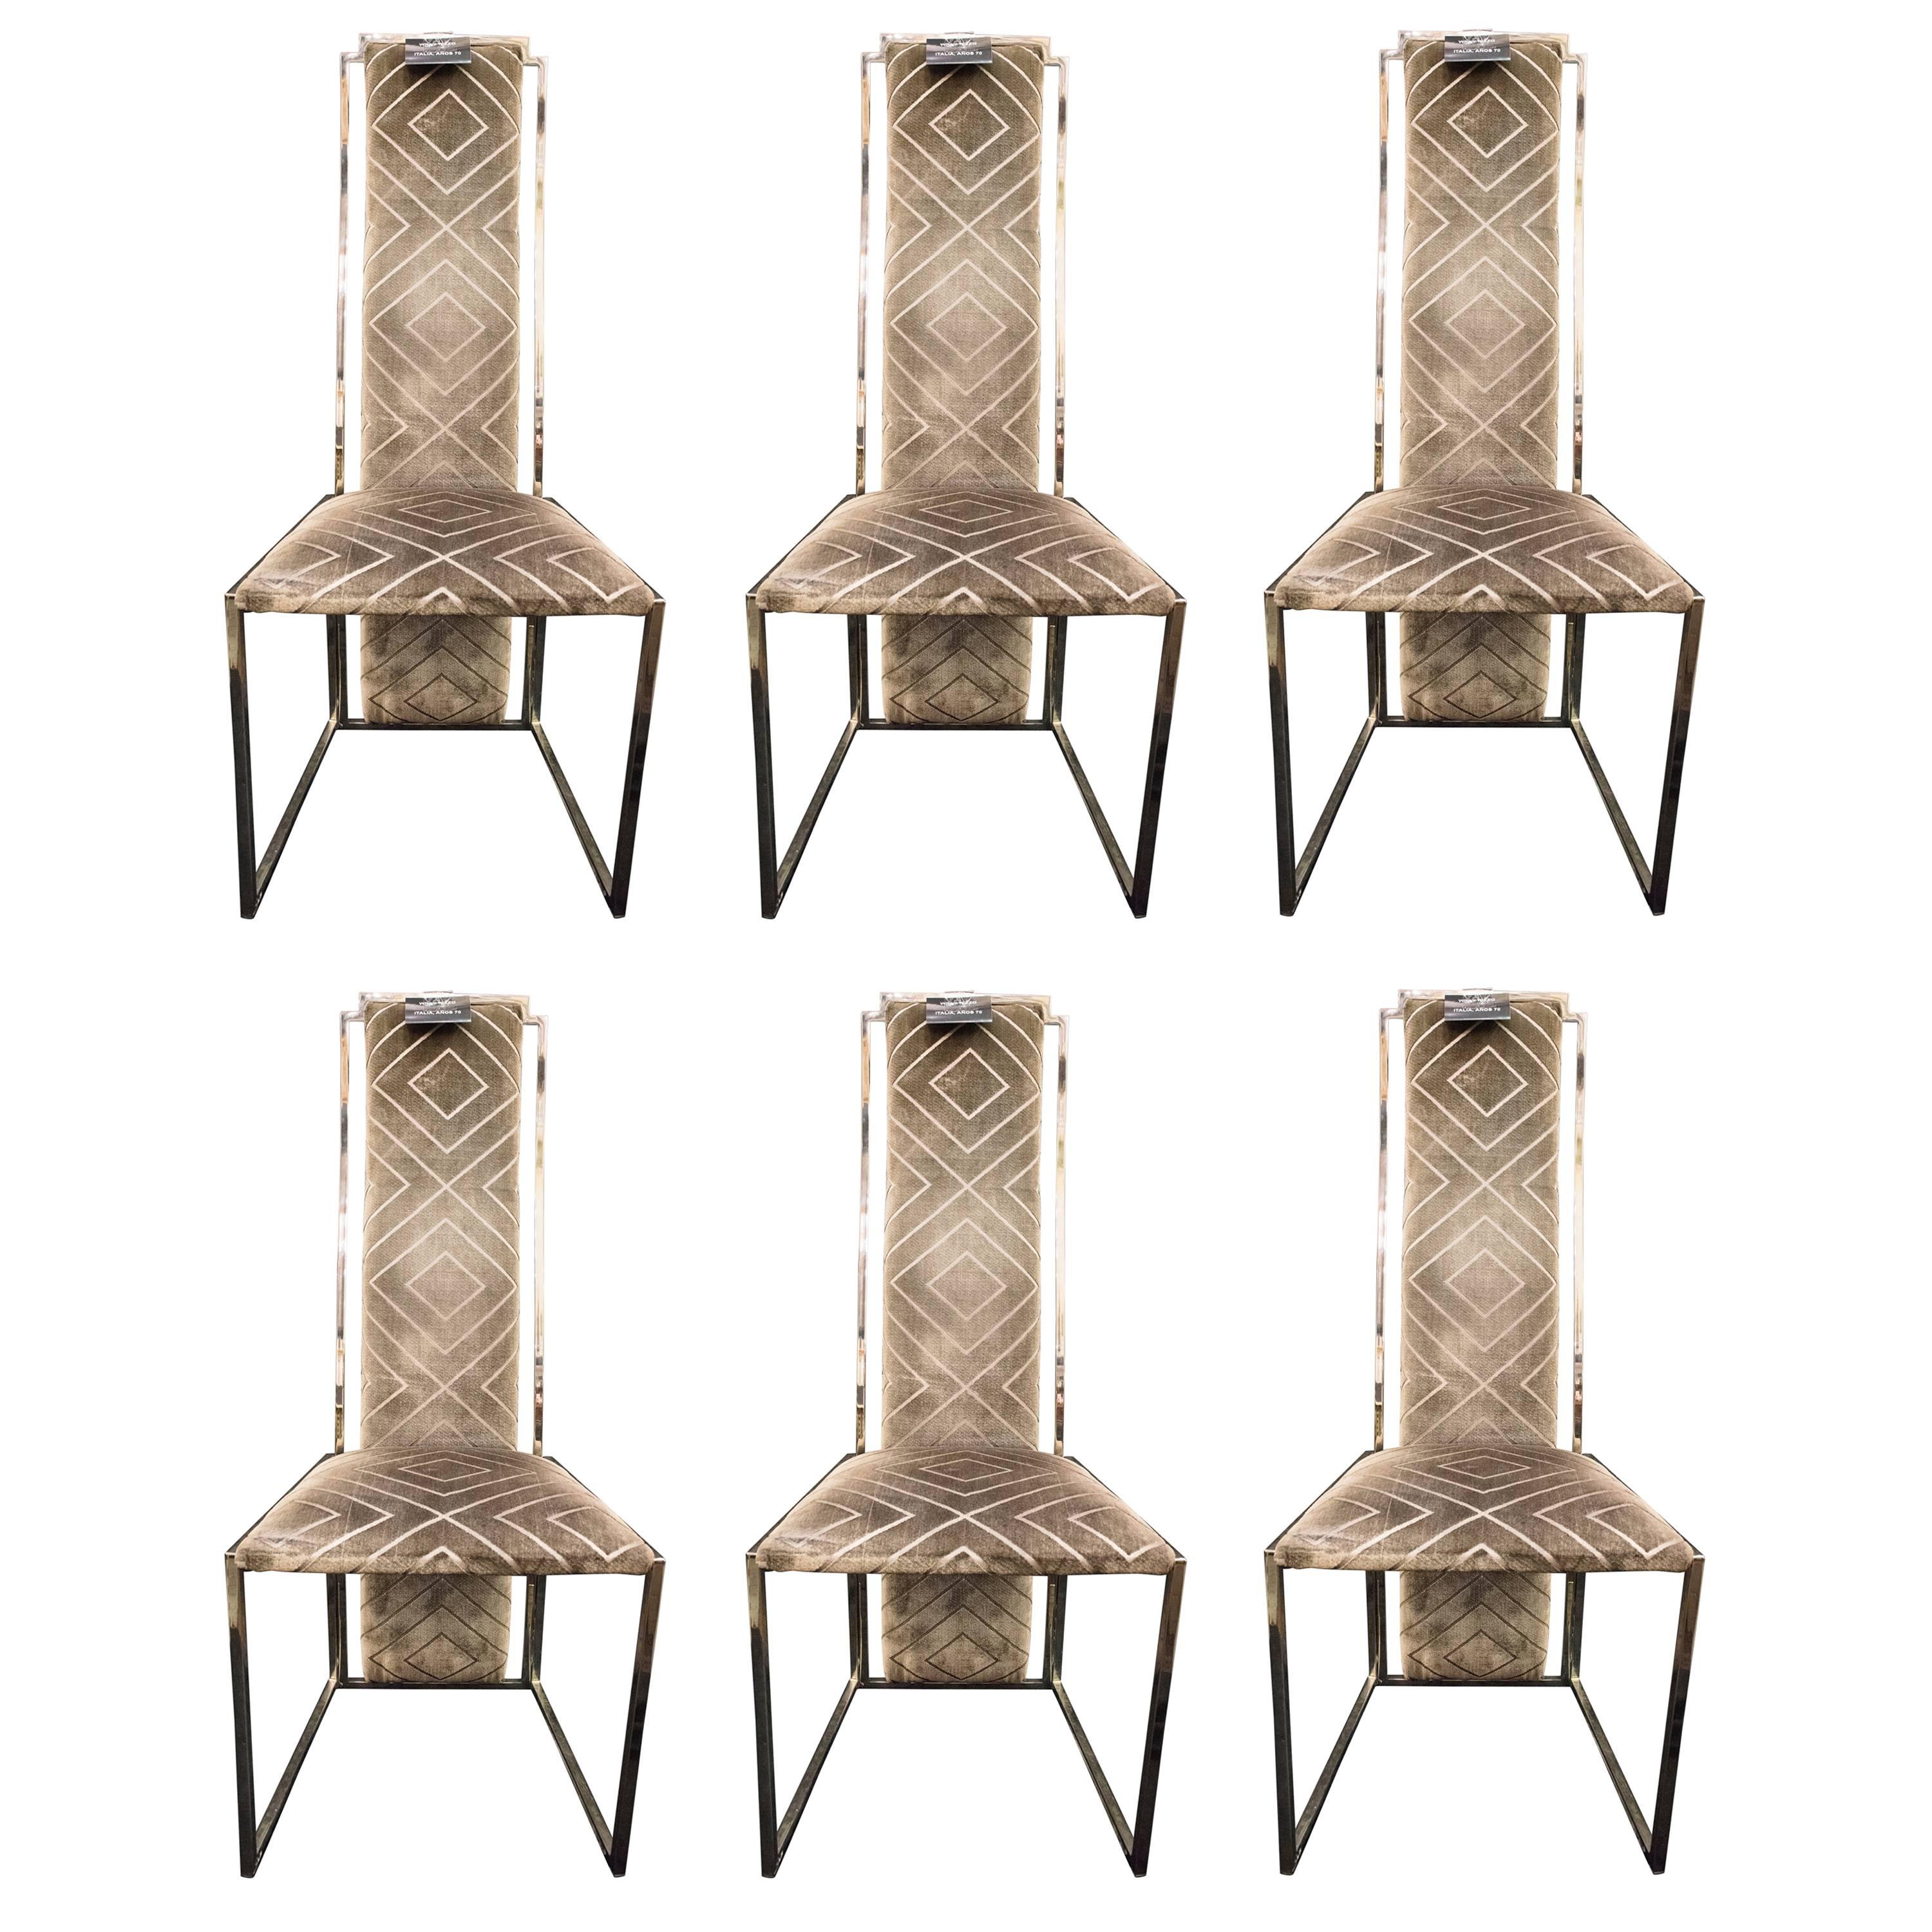 Willy Rizzo & Fabric Missoni Willy rizzo Chromed grey Steel Italian Set 6 Chairs